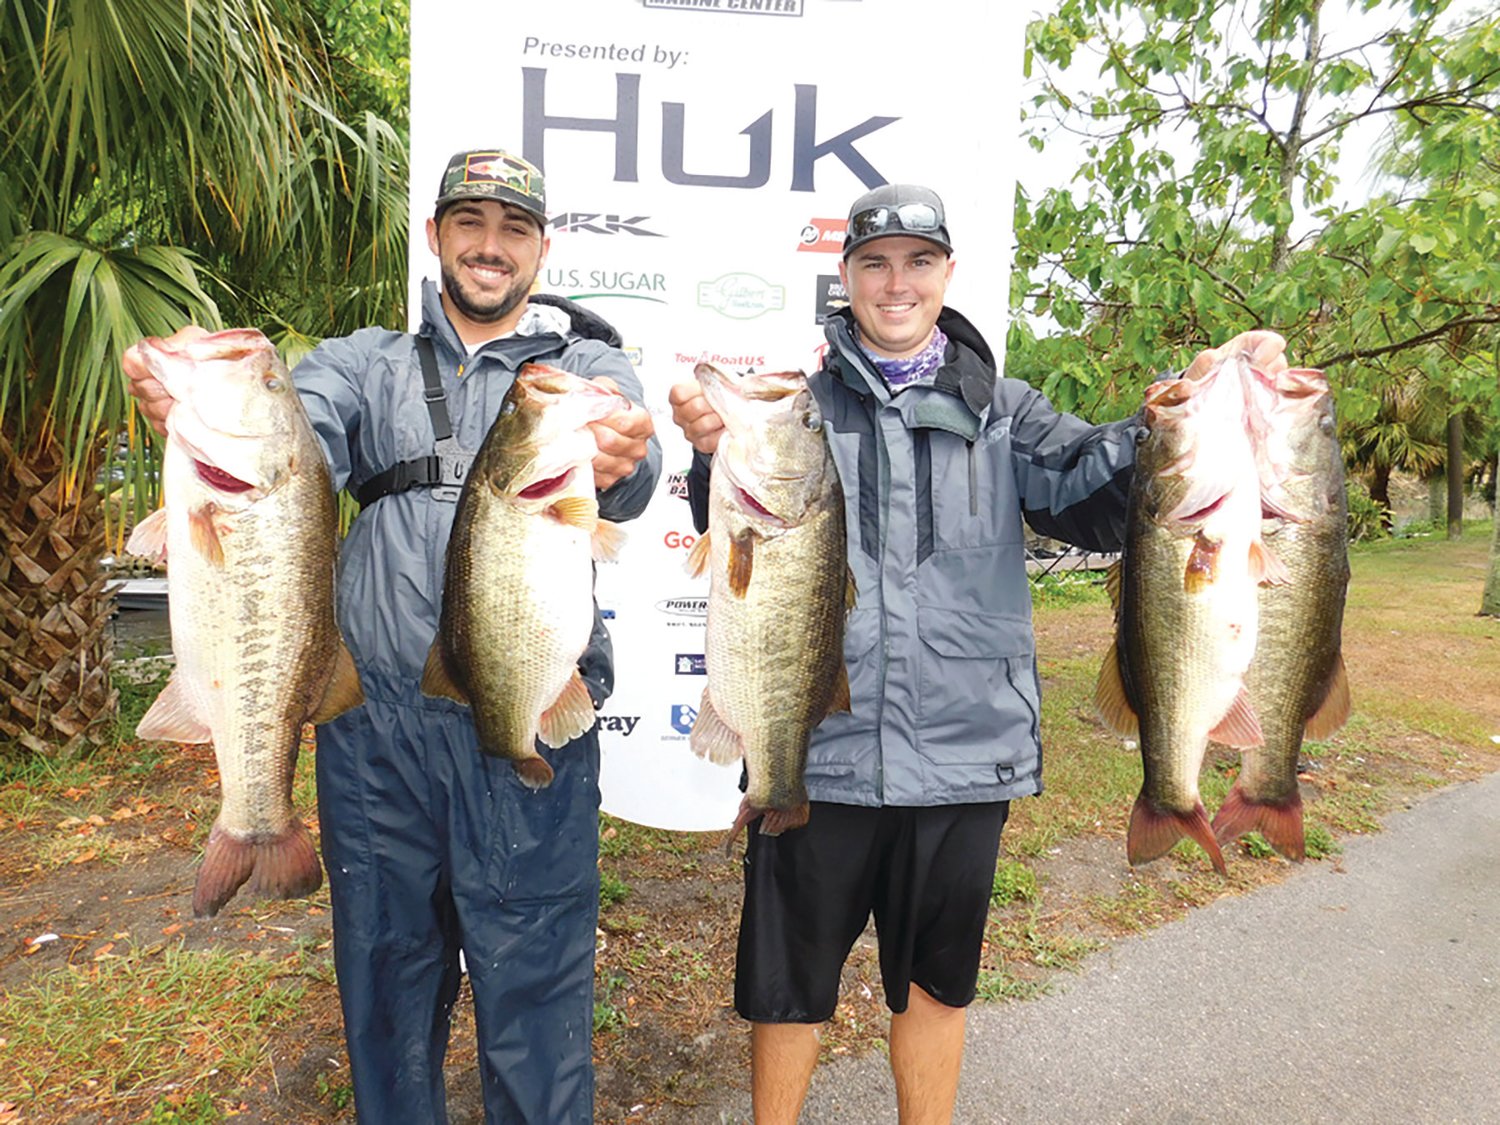 Coming in second with 26.83 pounds was the team of Nicholas Hoinig and Matt Wieteha, netting them $4,000,